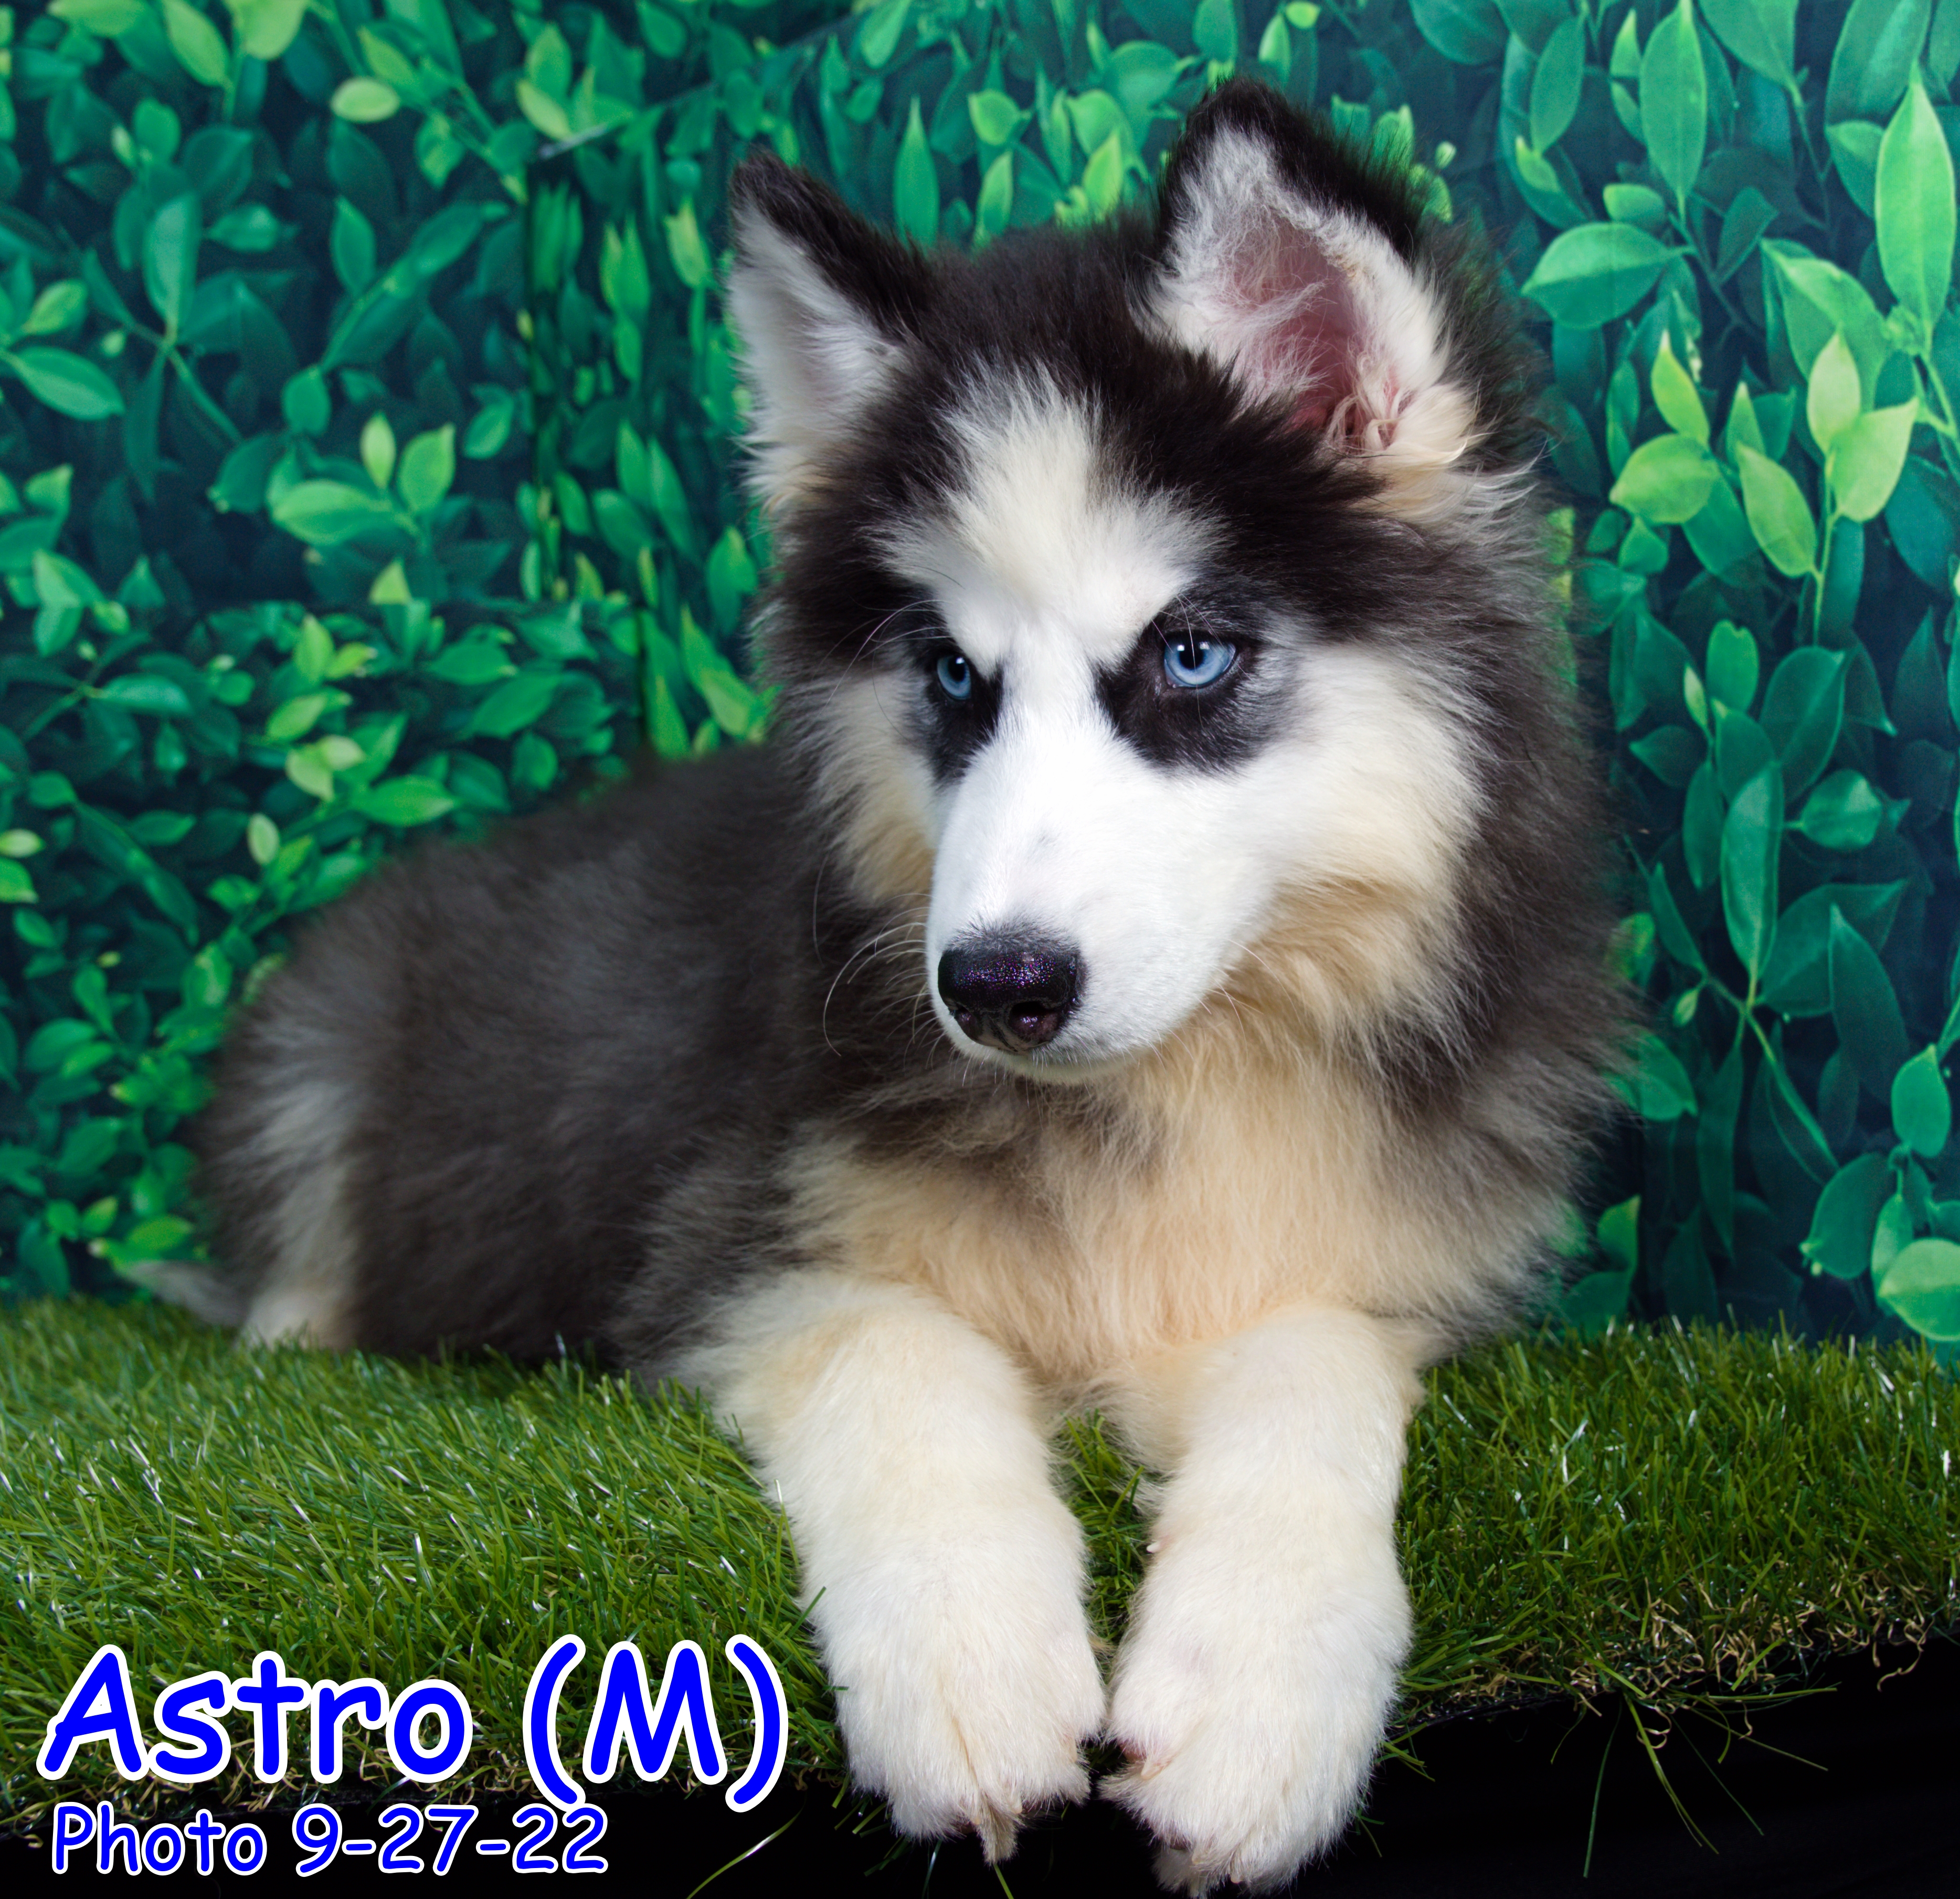 a picture of Astro a dog that needs a foster home.